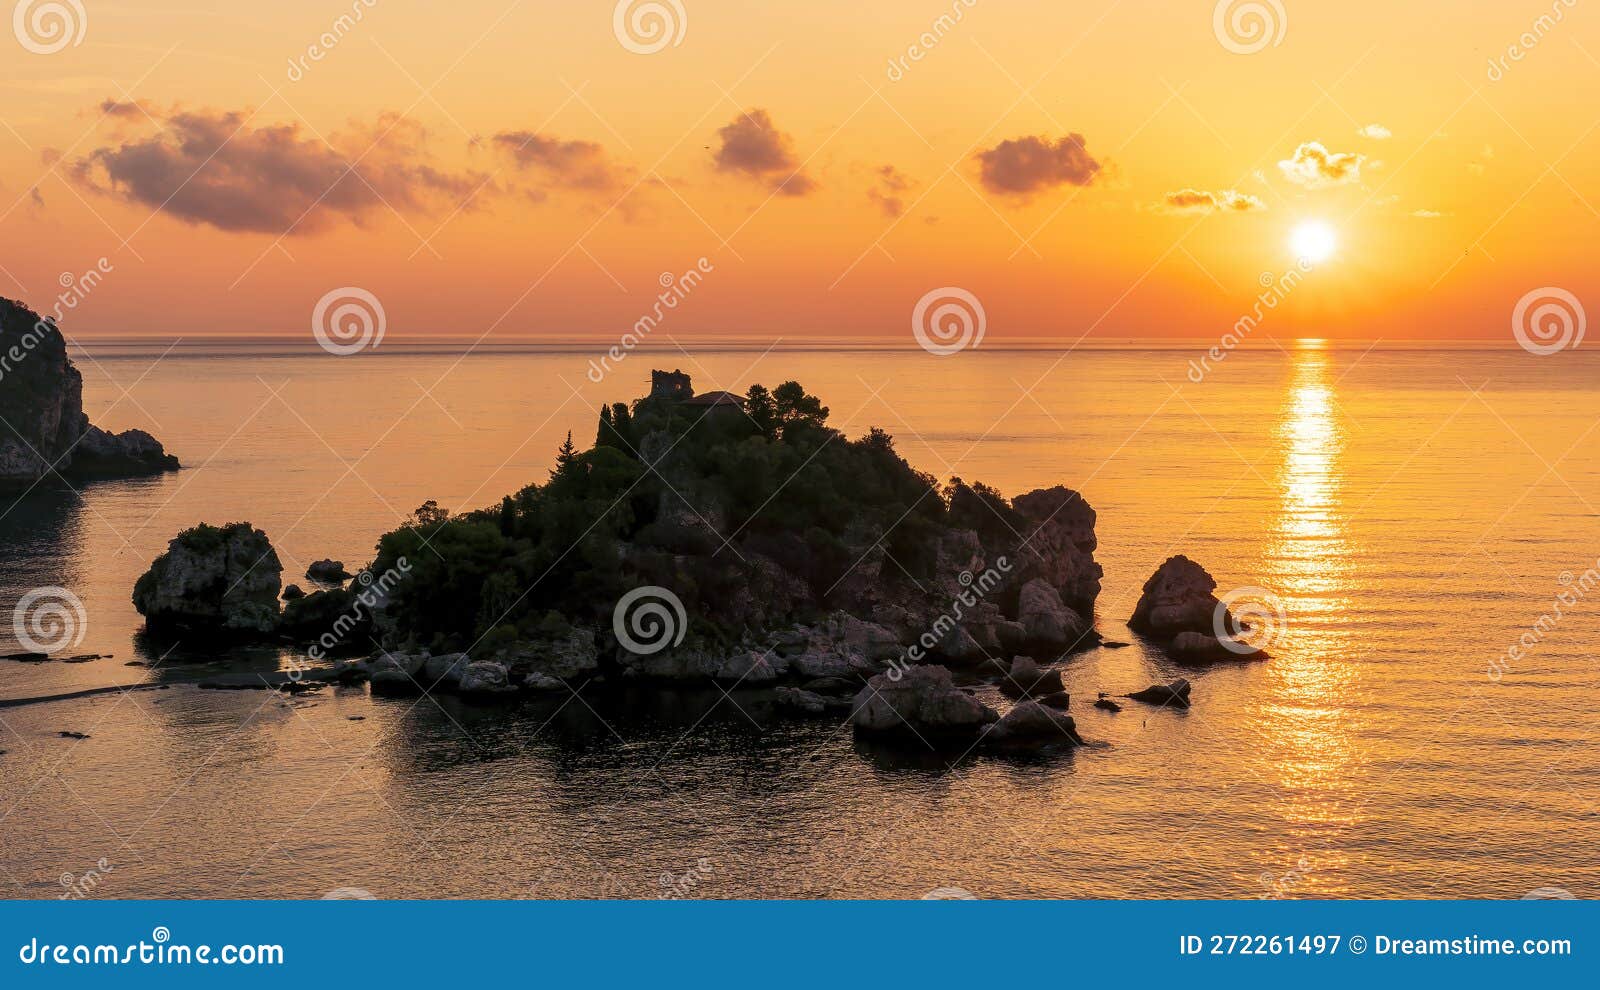 amazing view to a sunrise or sunset above beautiful isle in sea with nice coasline and clouds on the background of the evening sea